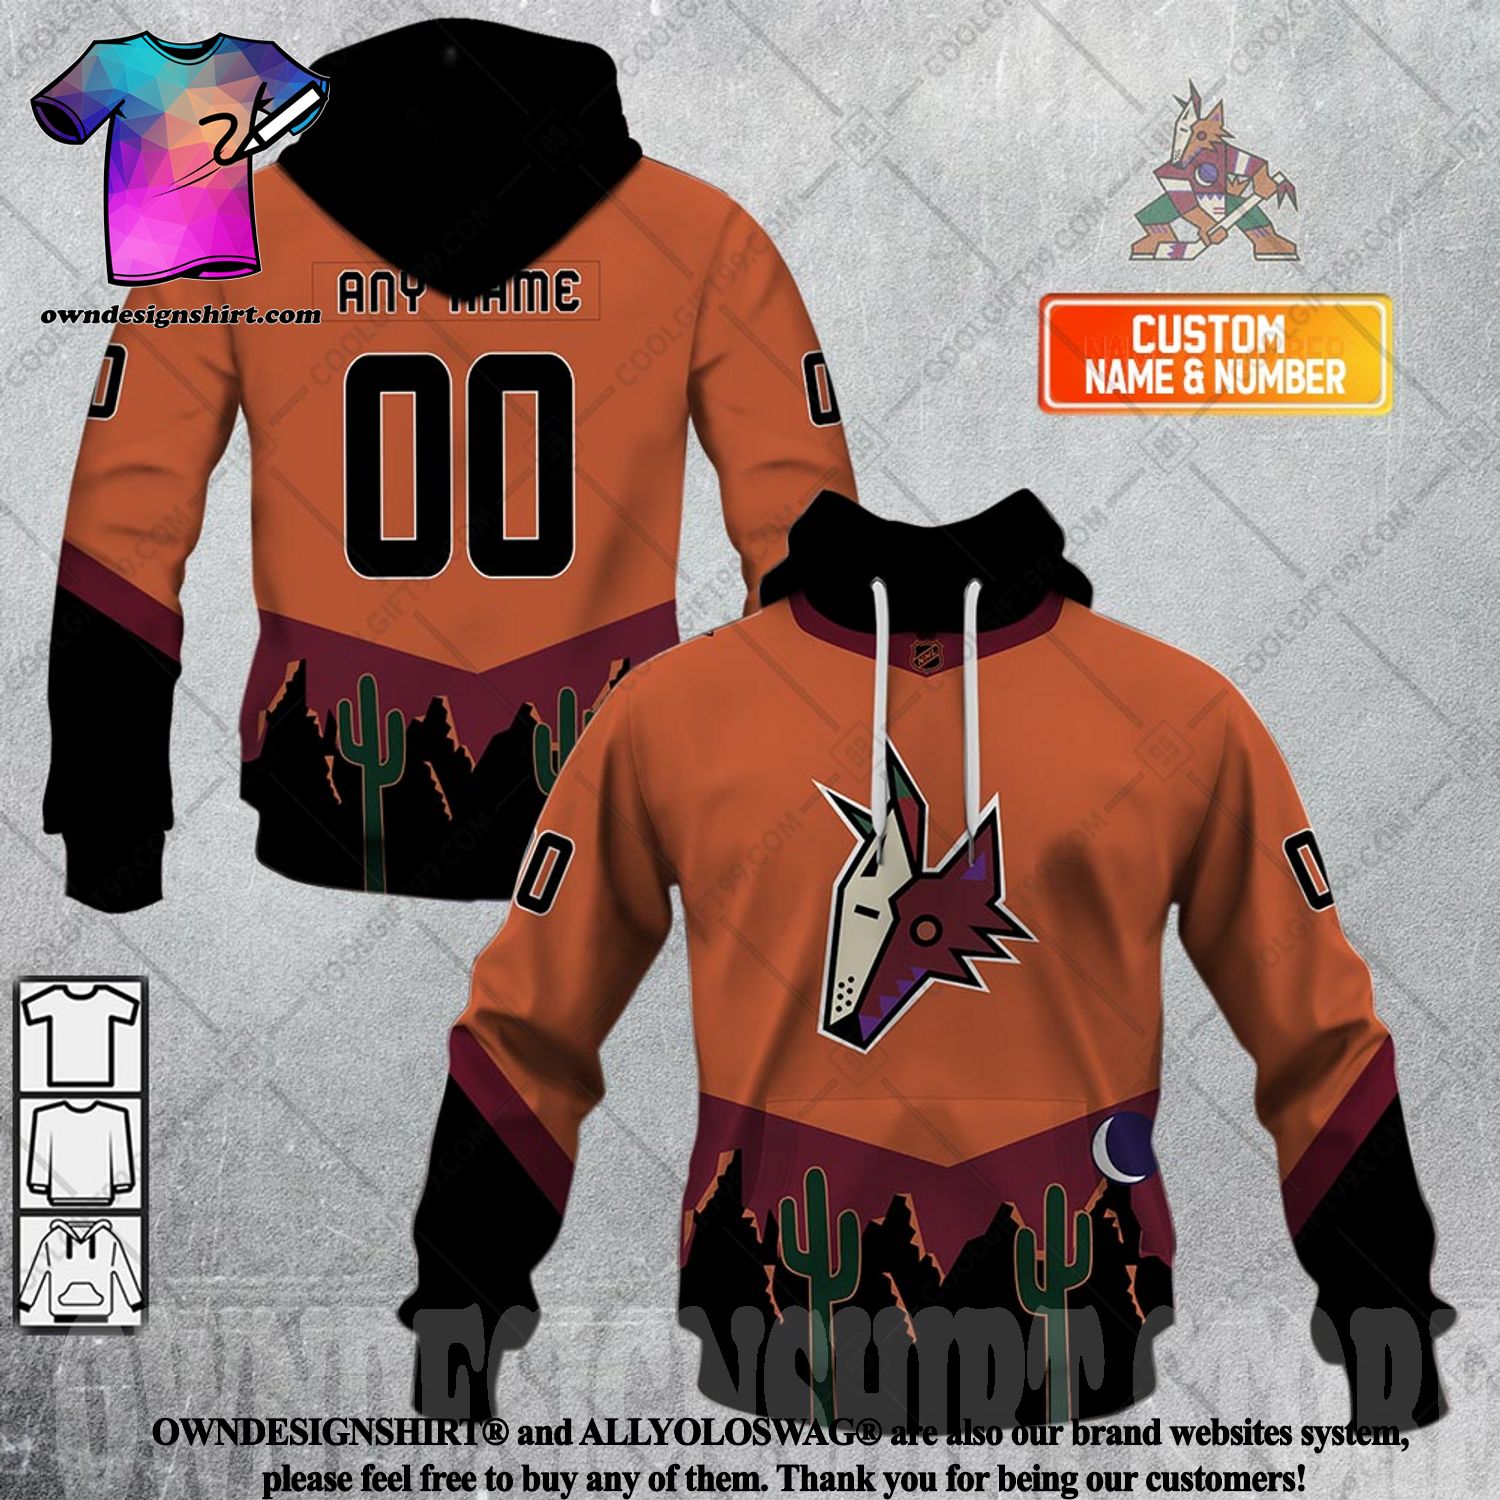 The best selling] Personalized NHL Arizona Coyotes Reverse Retro